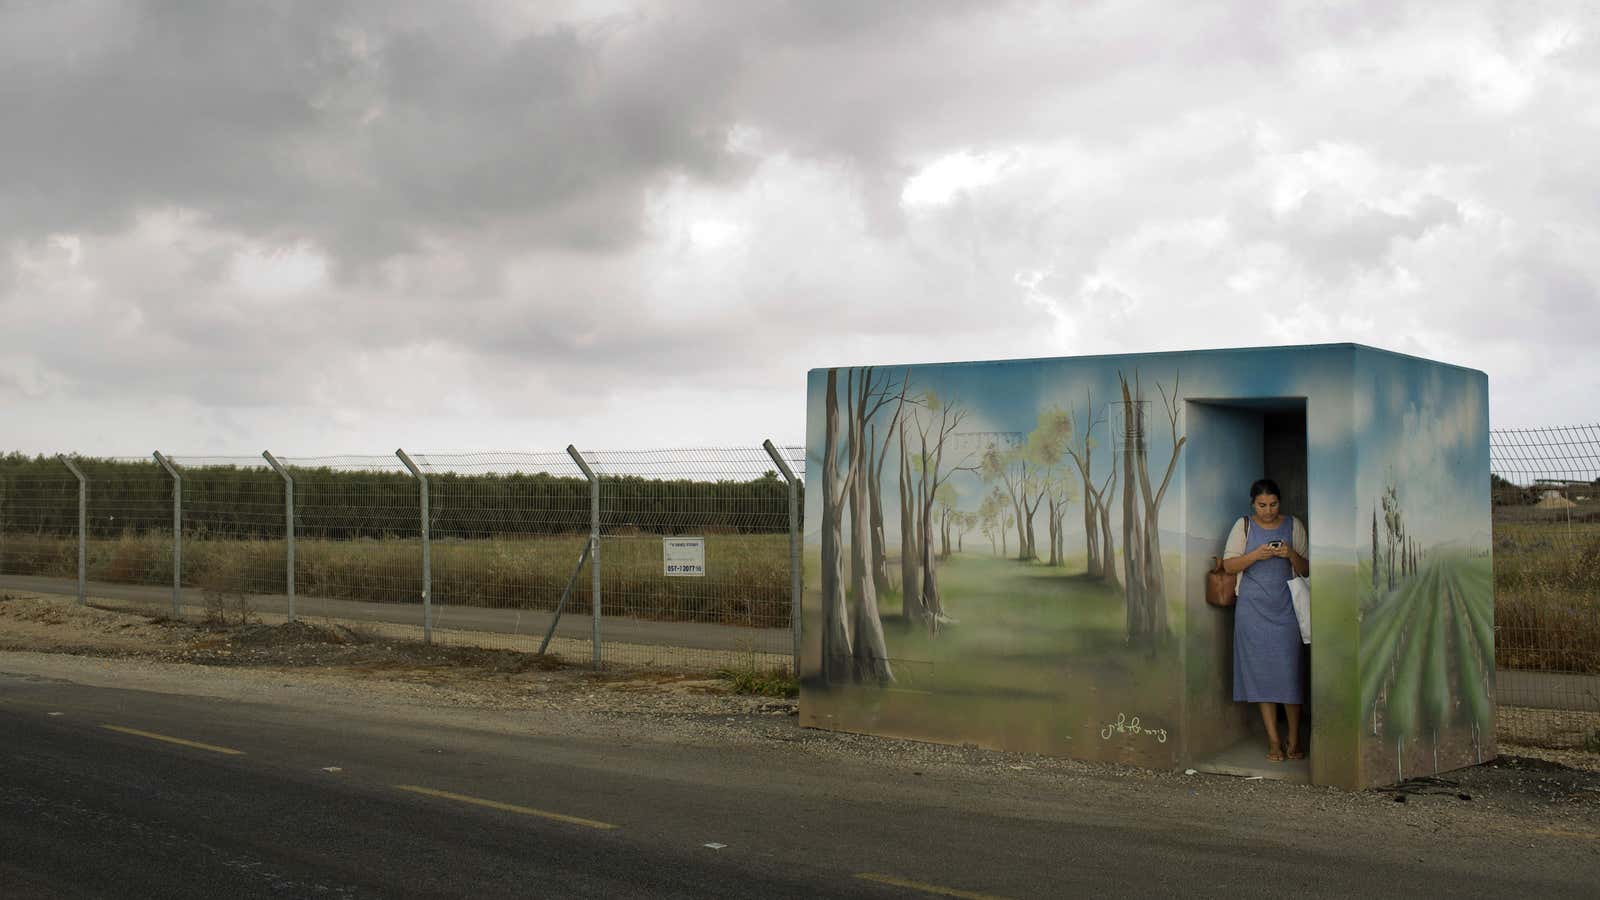 One of Eliasaf’s murals in the town of Sderot, near the Israel-Gaza border.